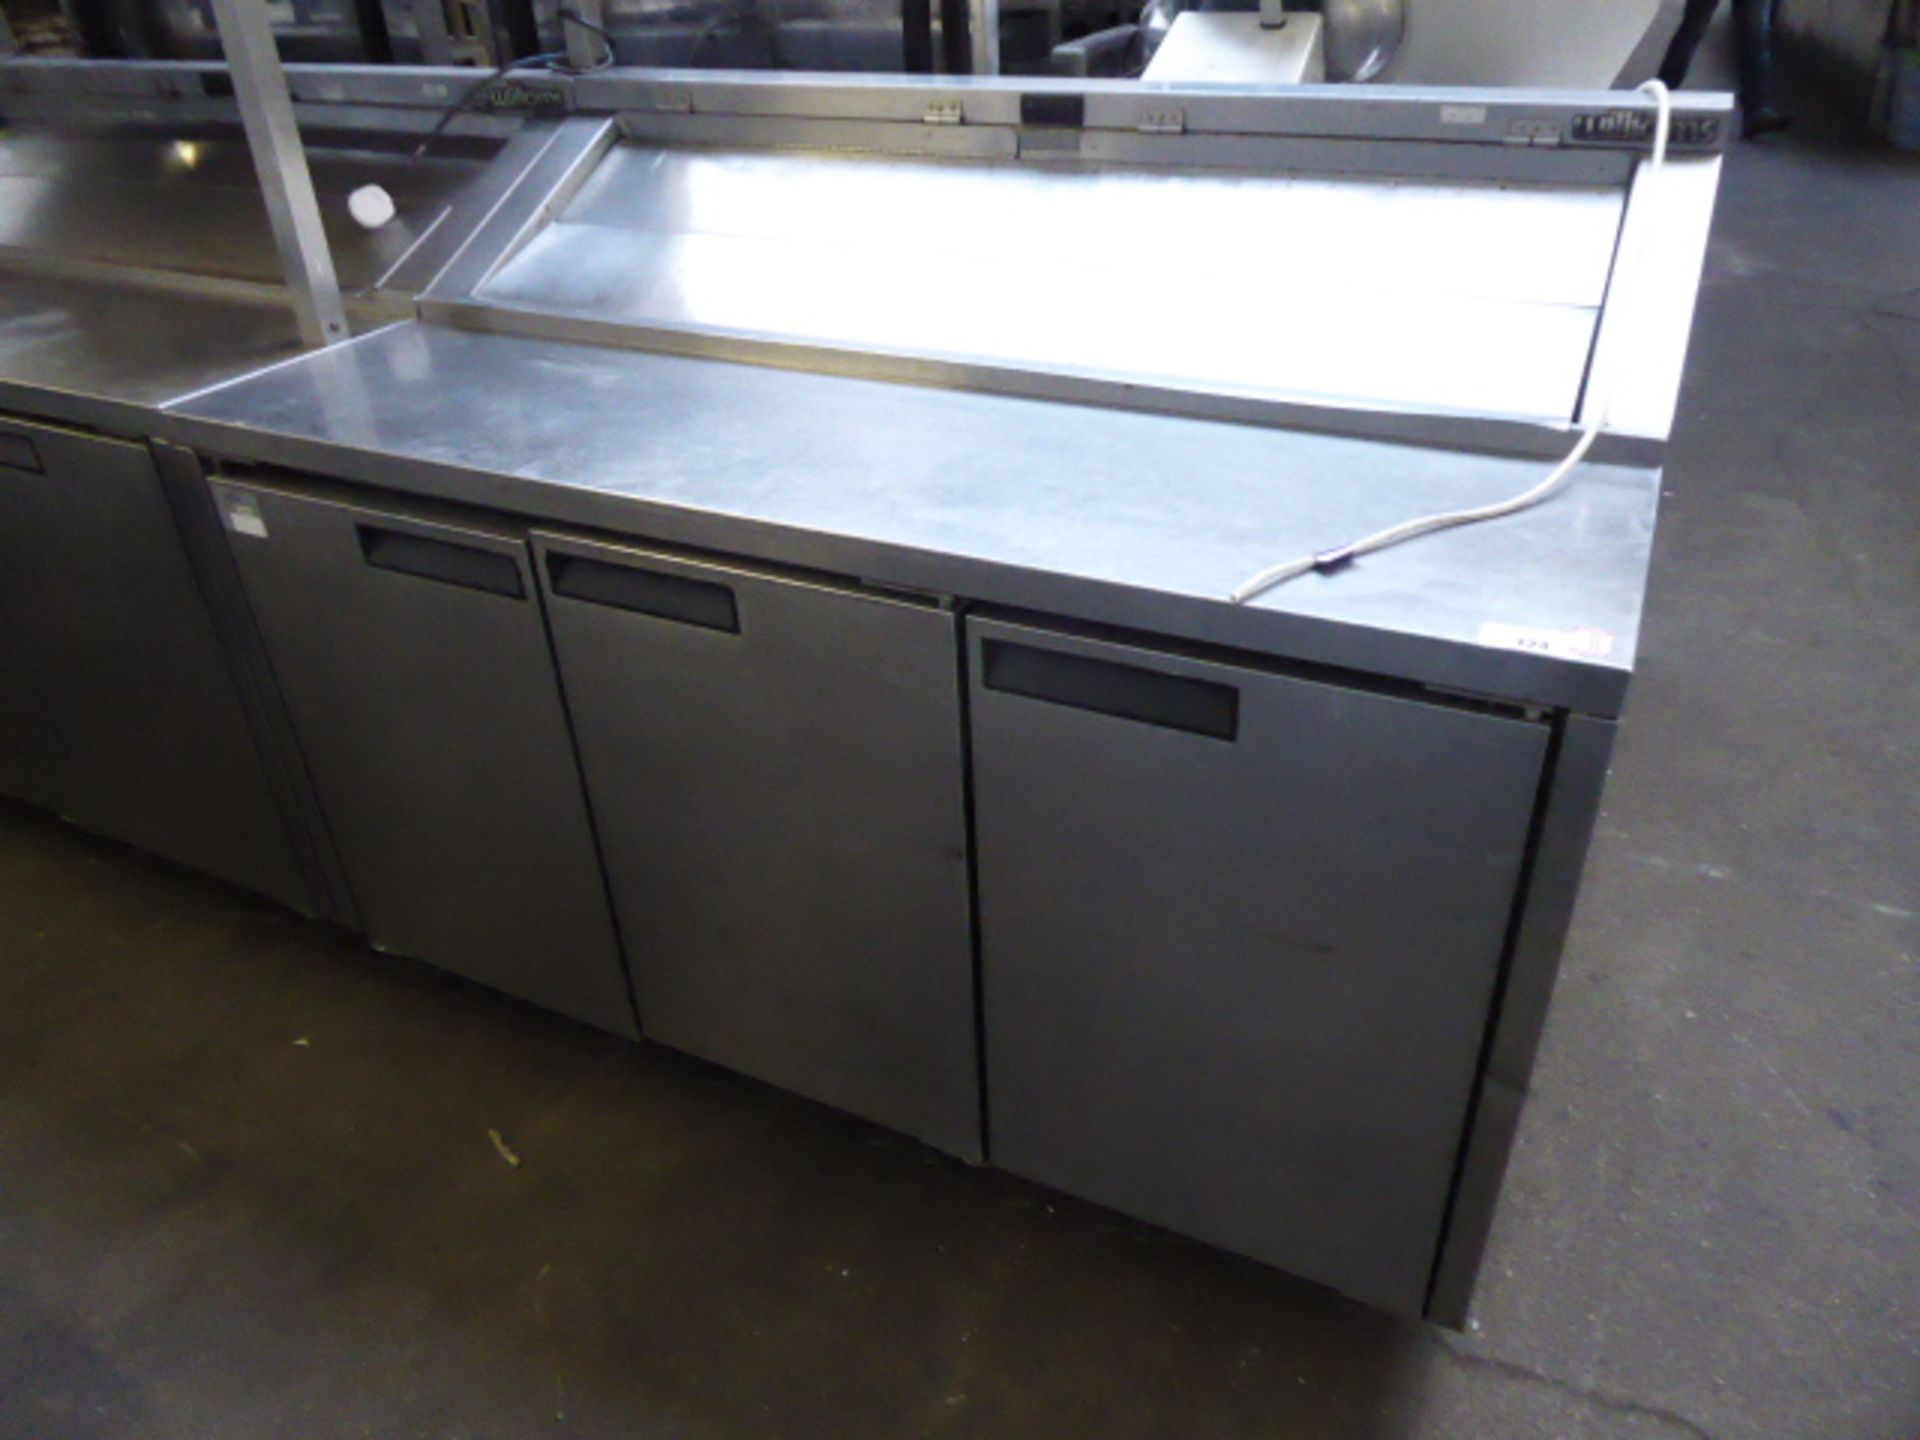 145cm Williams refrigerated pizza preparation counter with 3 doors under and cold well - failed test